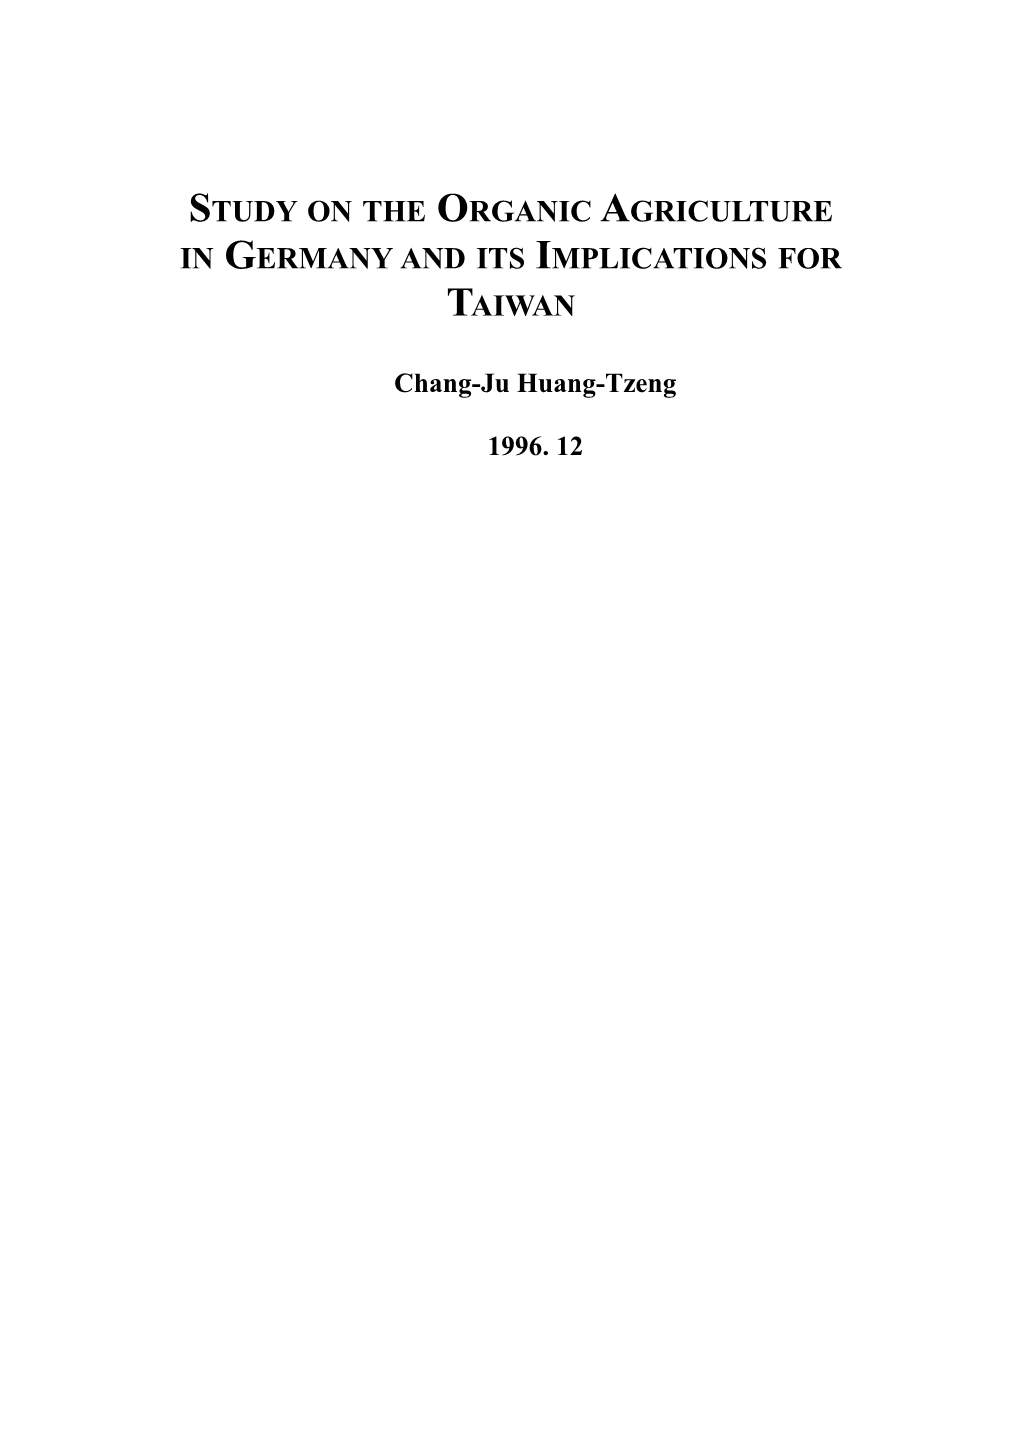 Study on the Organic Agriculture of Germany and Its Implications for Taiwan